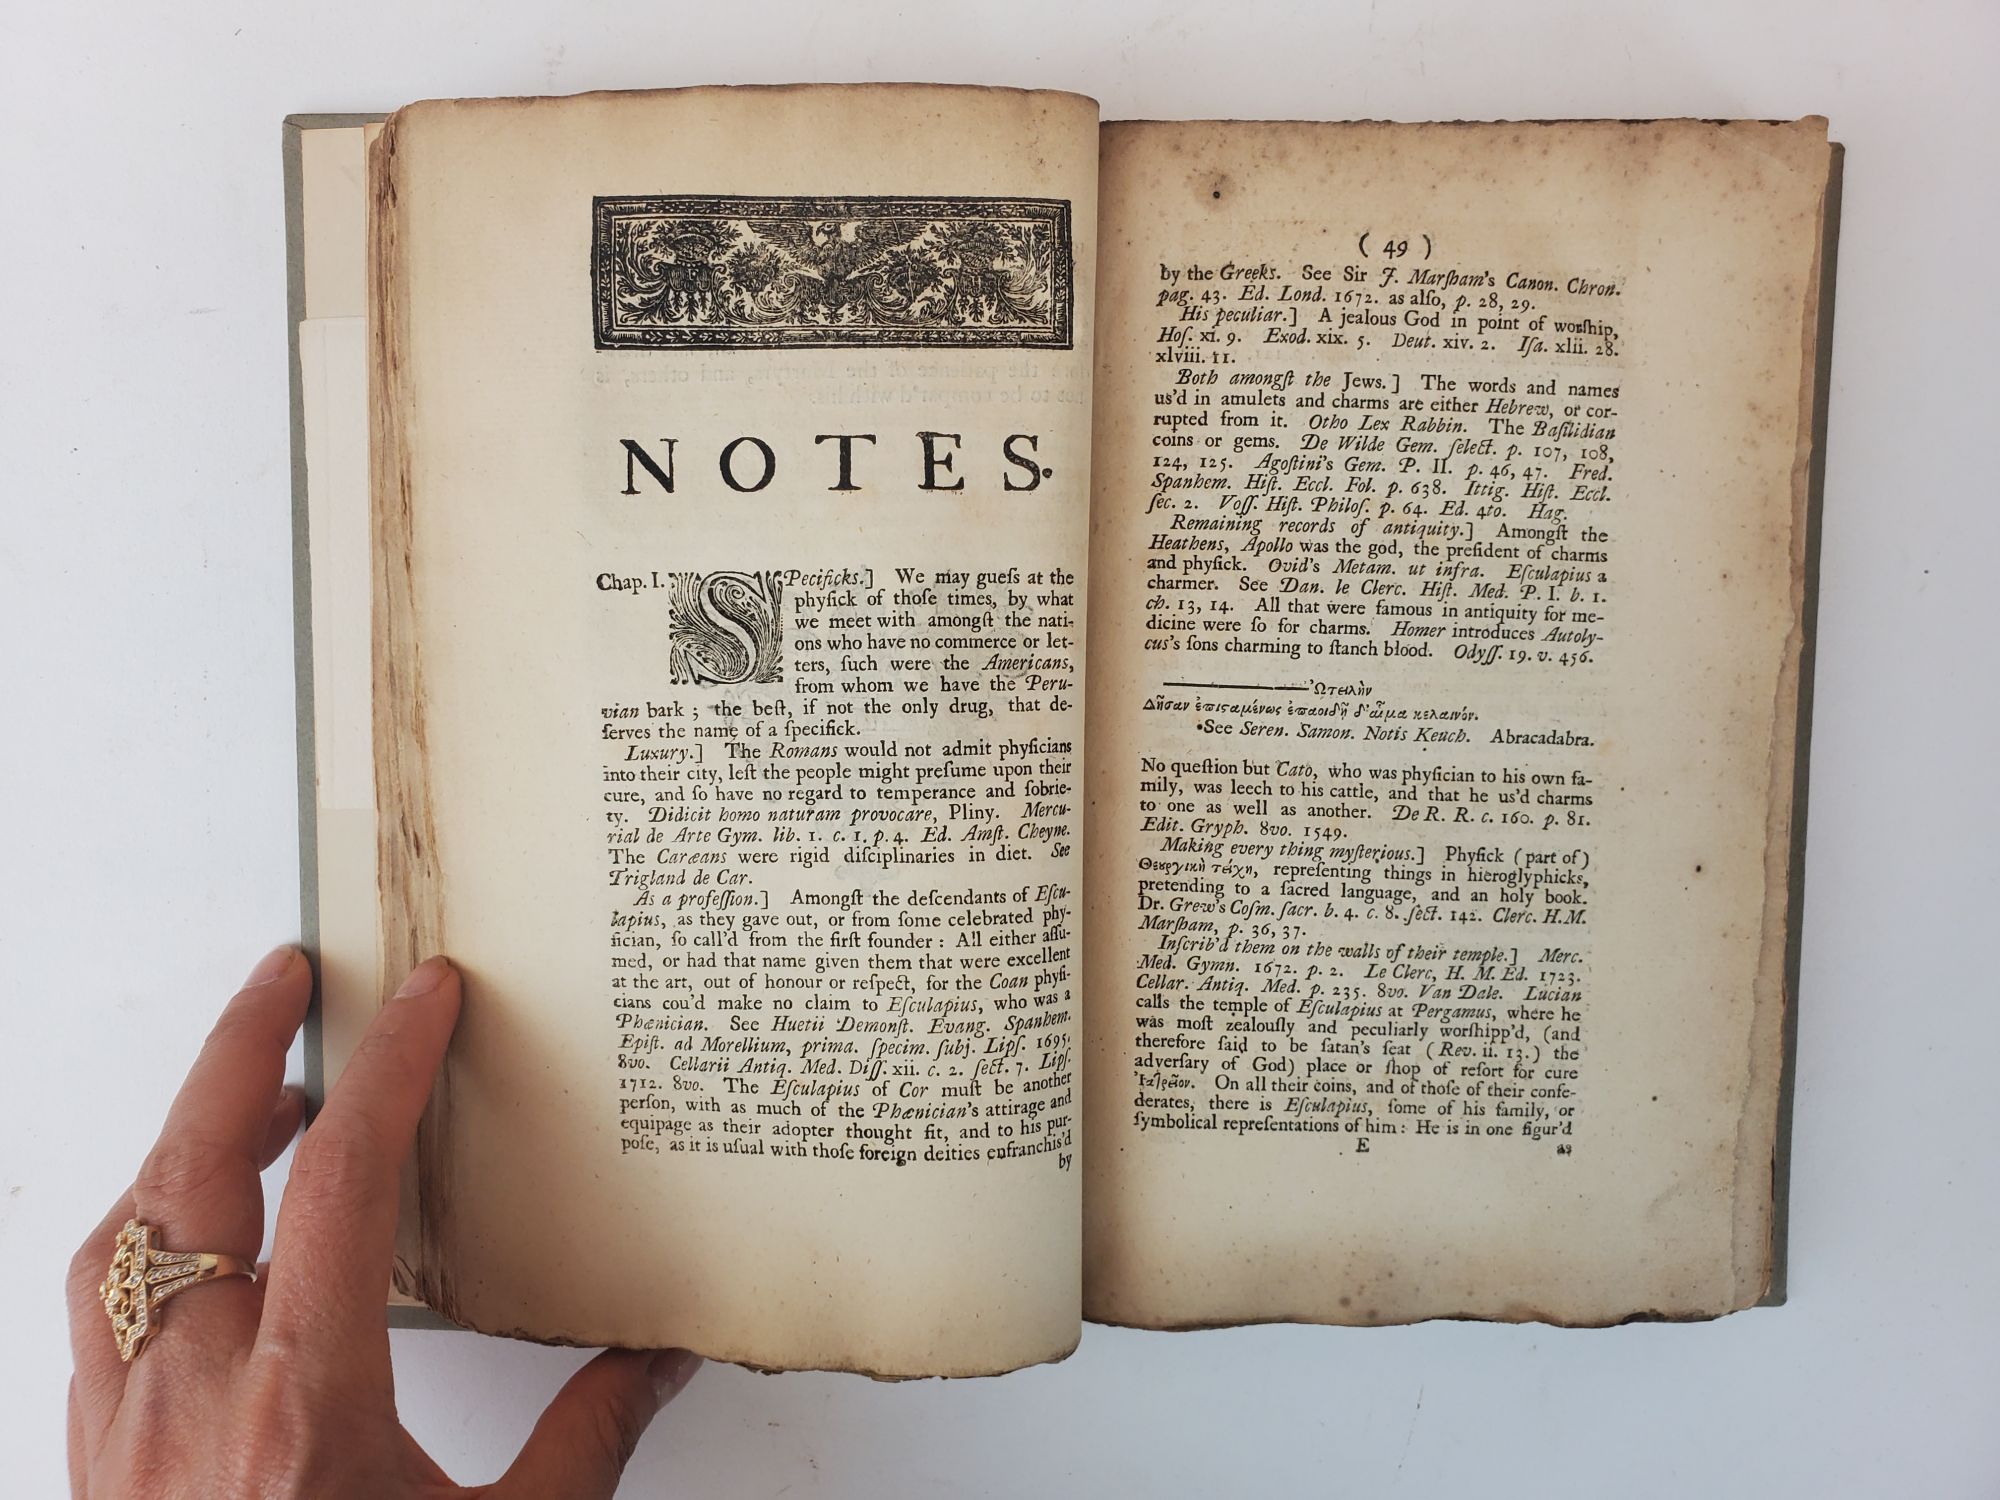 Product Image for AN HISTORICAL ESSAY ON THE STATE OF PHYSICK IN THE OLD AND NEW TESTAMENT, AND THE APOCRYPHAL INTERVAL: WITH A PARTICULAR ACCOUNT OF THE CASES MENTIONED IN SCRIPTURE, AND OBSERVATIONS UPON THEM